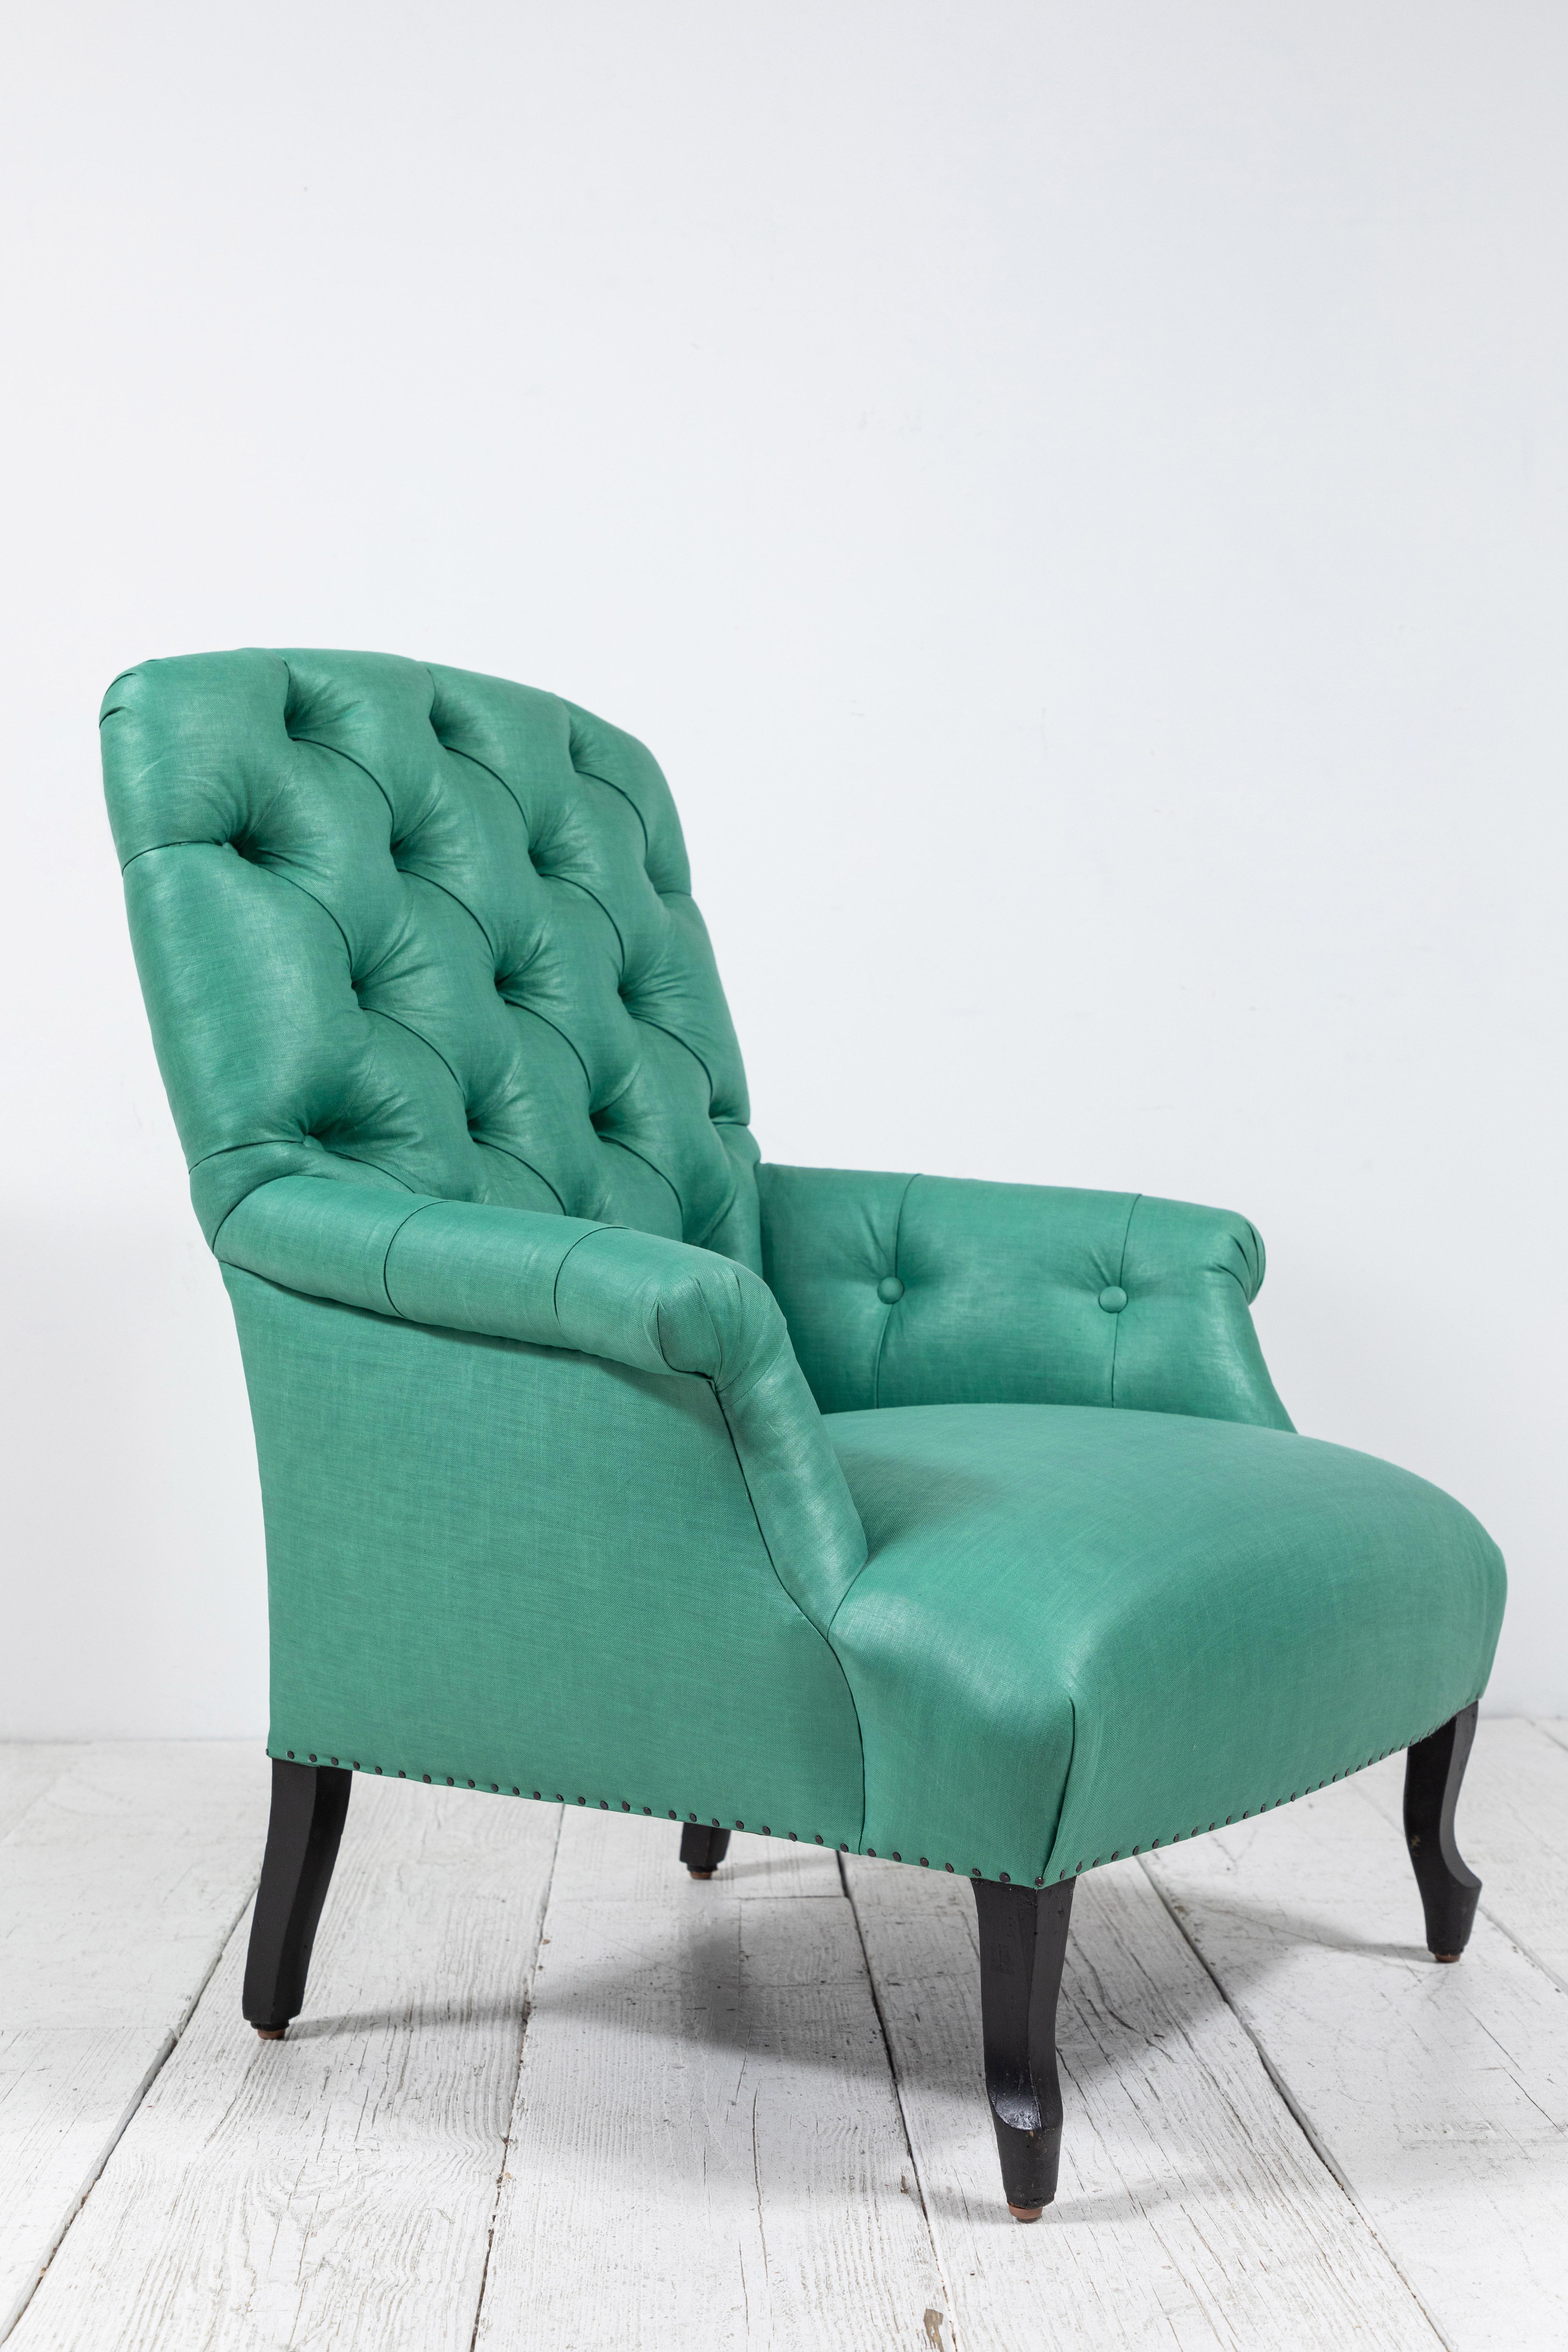 Mid-20th Century Pair of Green French Tufted Club Chairs